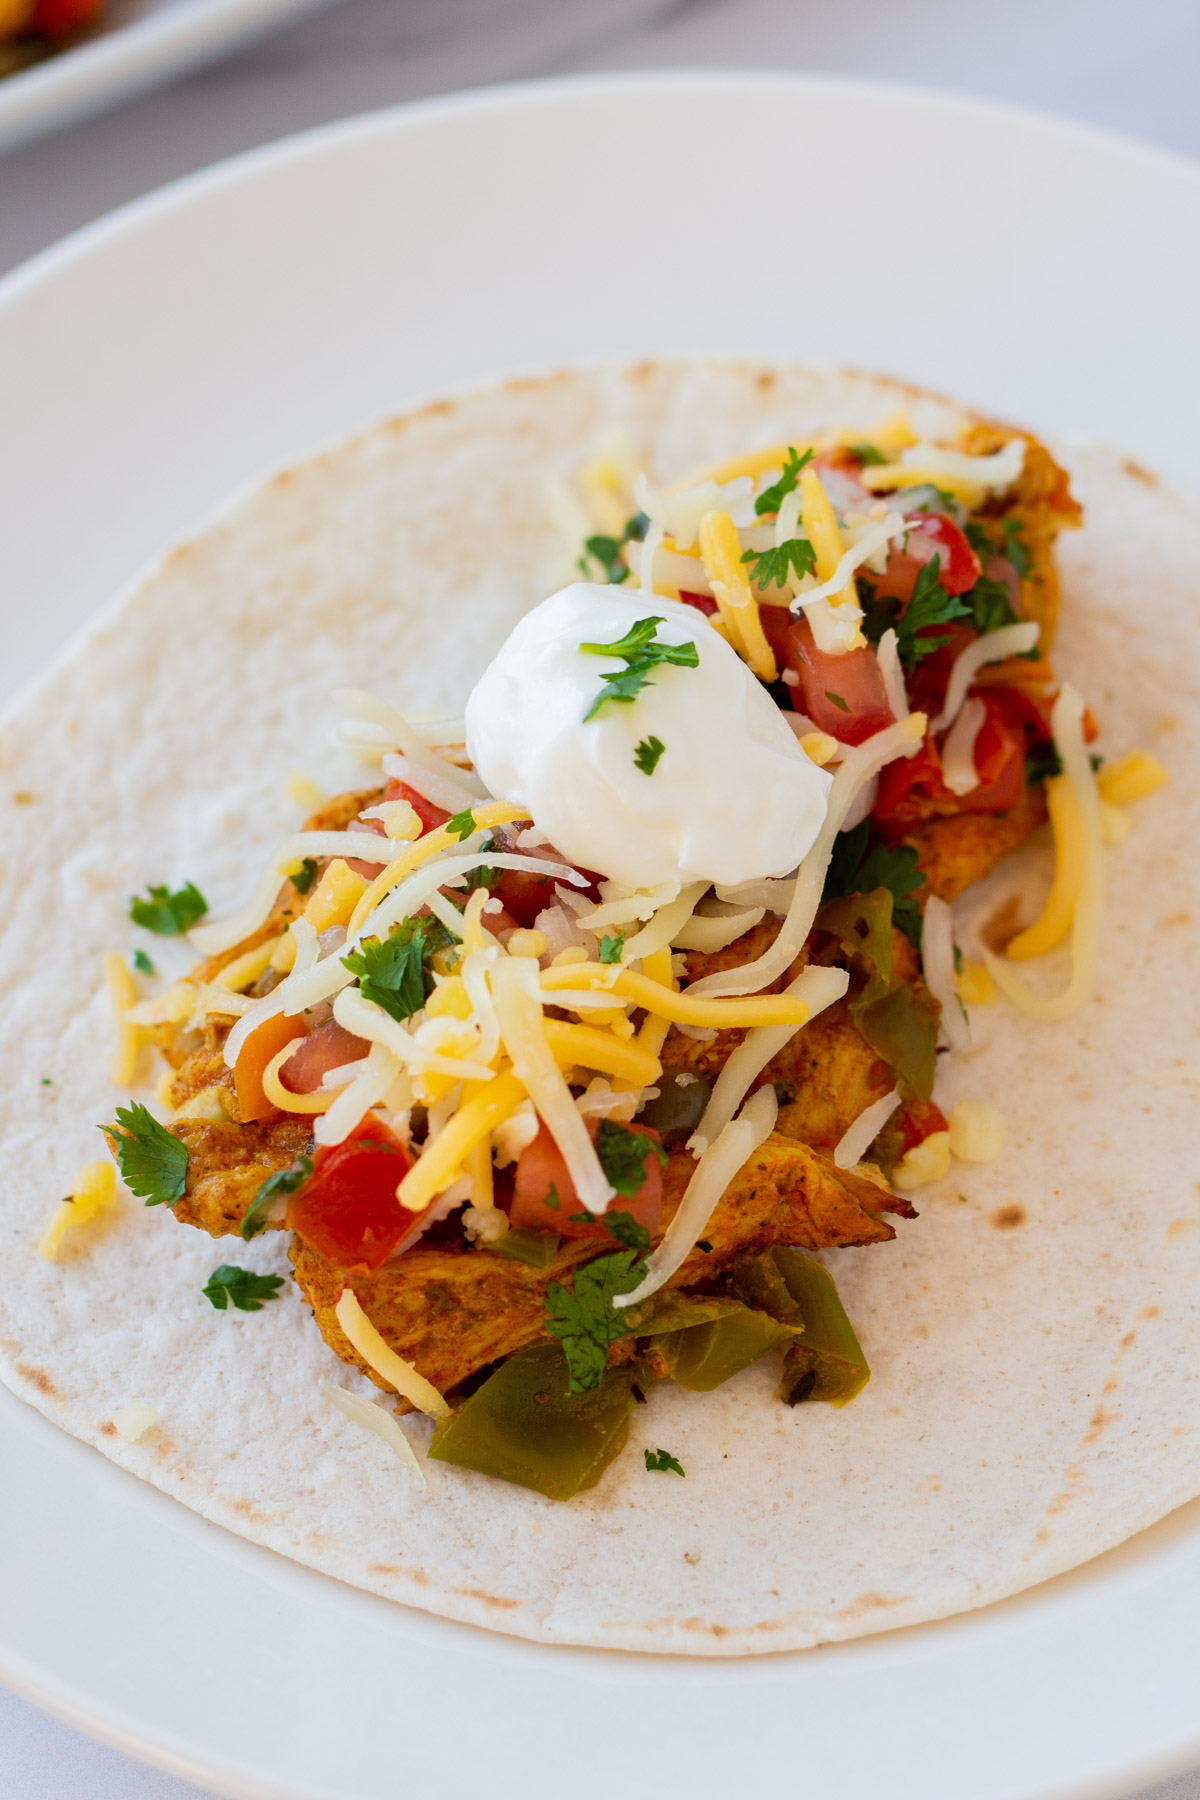 Instant Pot chicken fajitas are the perfect choice for both a quick dinner and for meal prepping. These tasty fajitas are ready in 10 minutes and are dairy free, gluten free, and low carb. The recipe requires only six ingredients and you can customize it to make your perfect fajita. #10minutemeals #glutenfreerecipes #diaryfreerecipes #glutenfreedairyfreerecipes #lowcarbrecipes #instantpotrecipes #chickenfajitas #pressurecookerrecipes #easymealprep